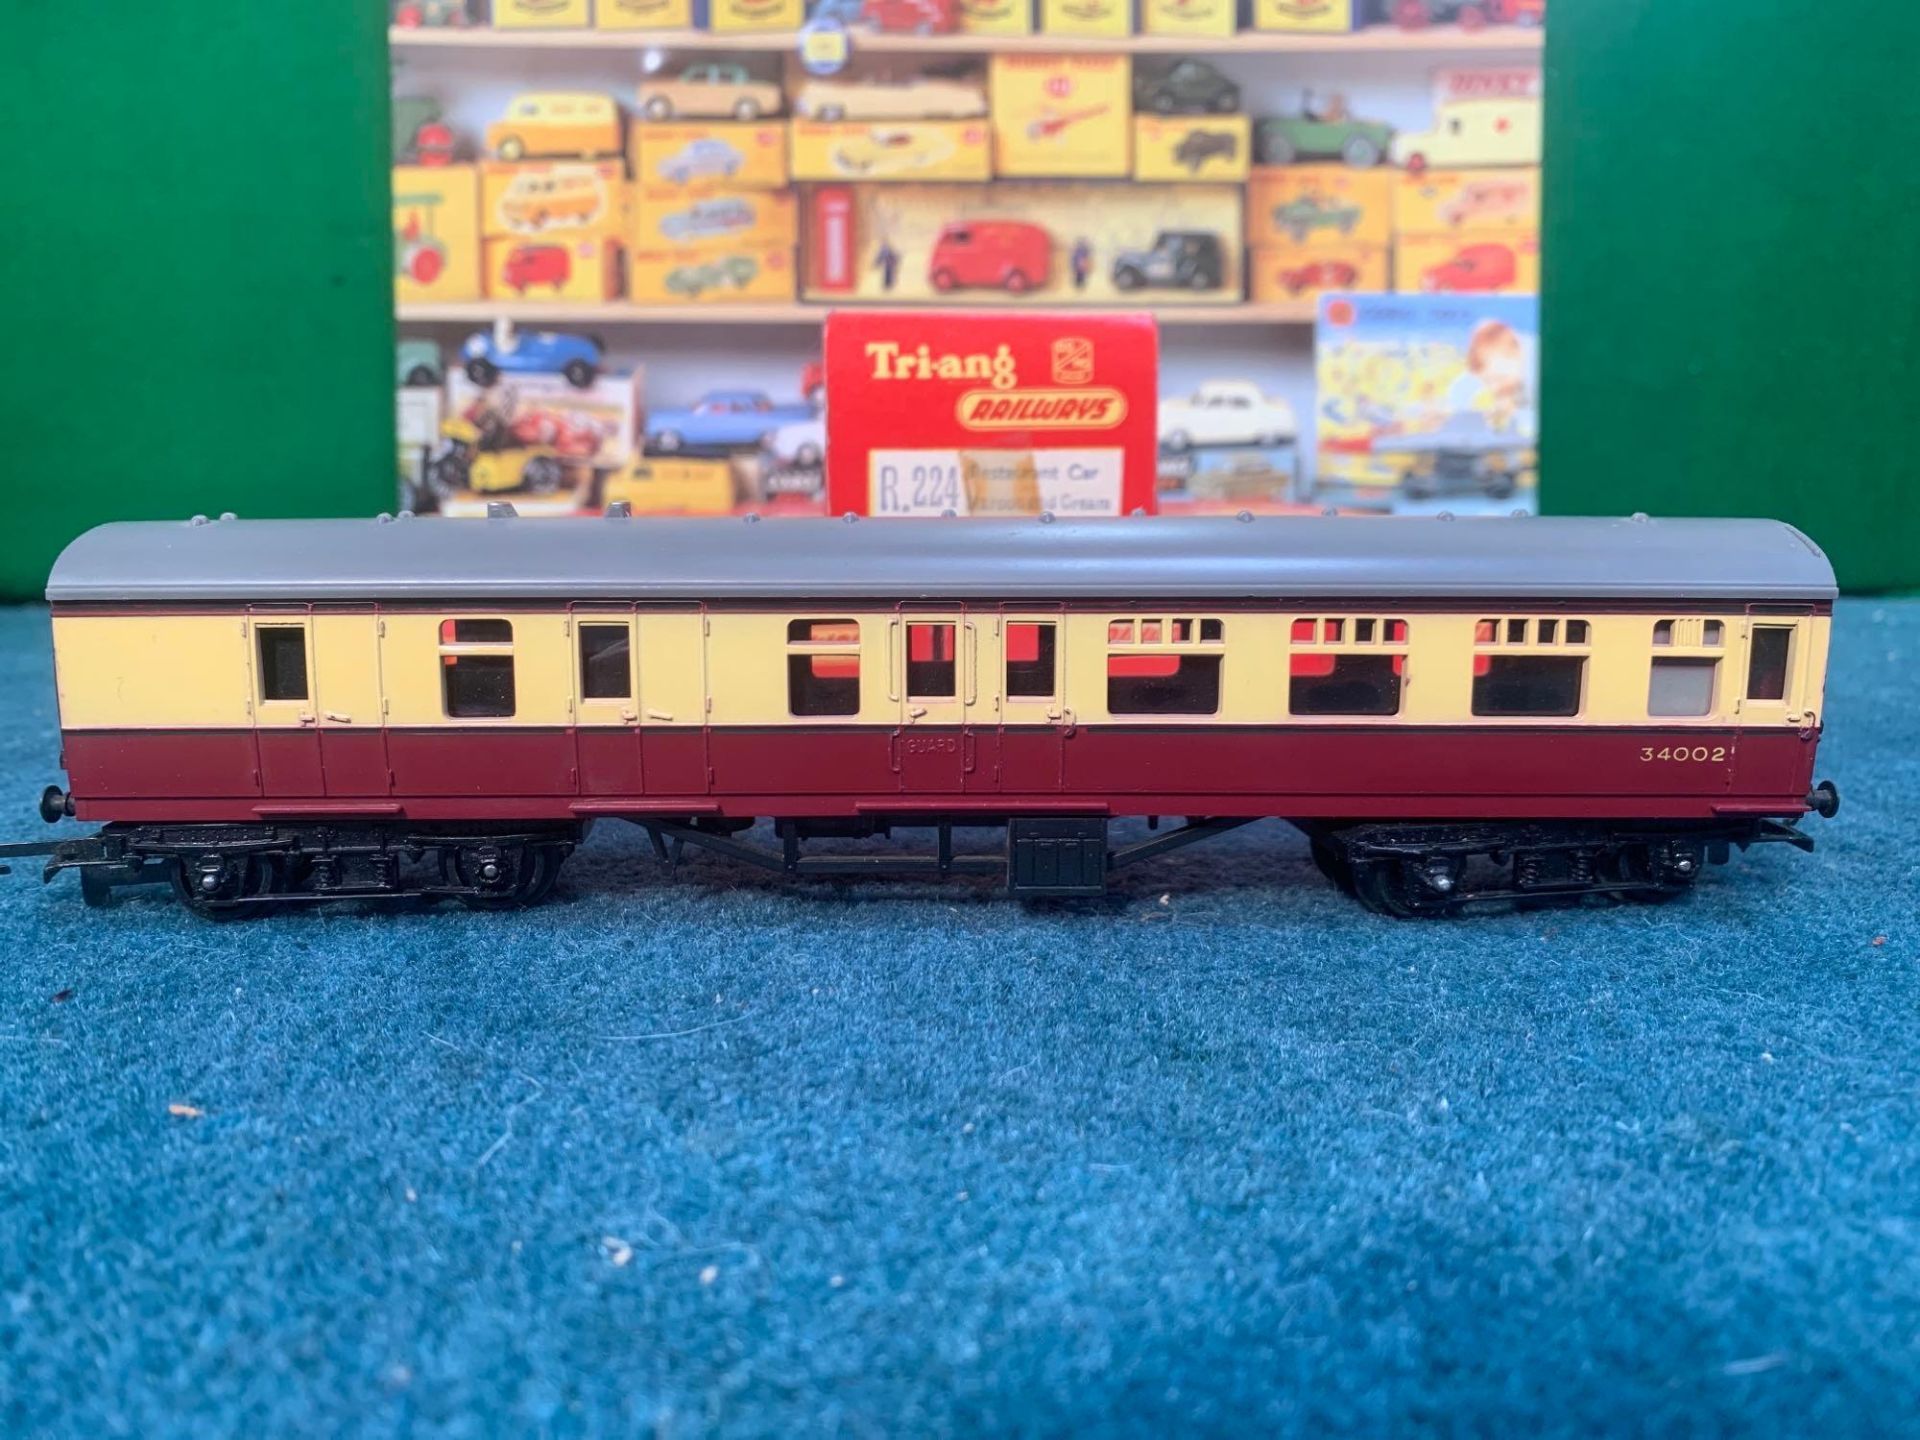 7 X Tri-Ang 00/H0 Gauge Railways Built In Britain By Rovex Scale Models Limited. R.120 B.R. - Image 6 of 11